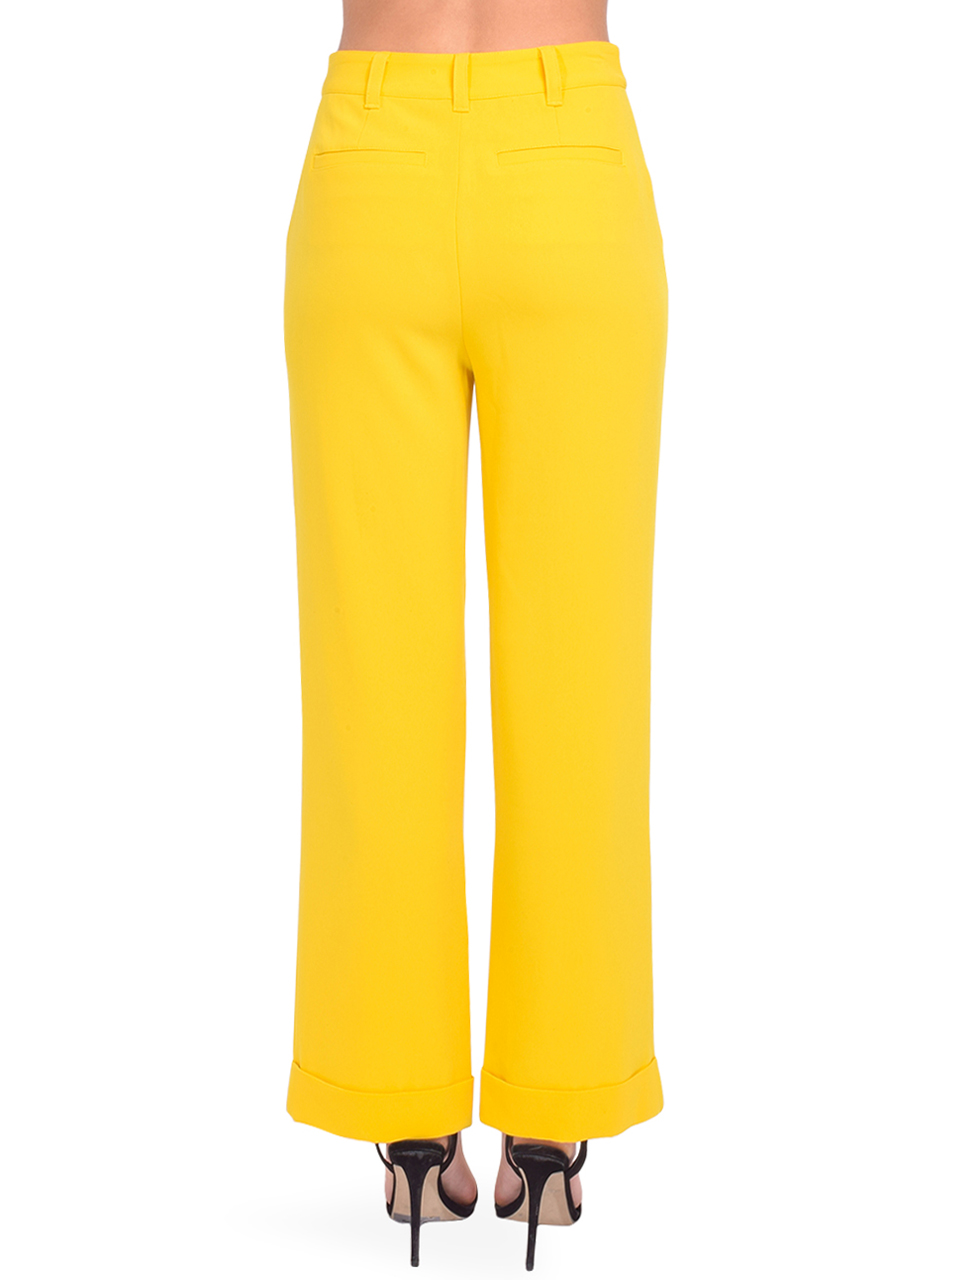 Cinq a Sept Kris High-Rise Wide-Leg Pant in Pineapple Back View 